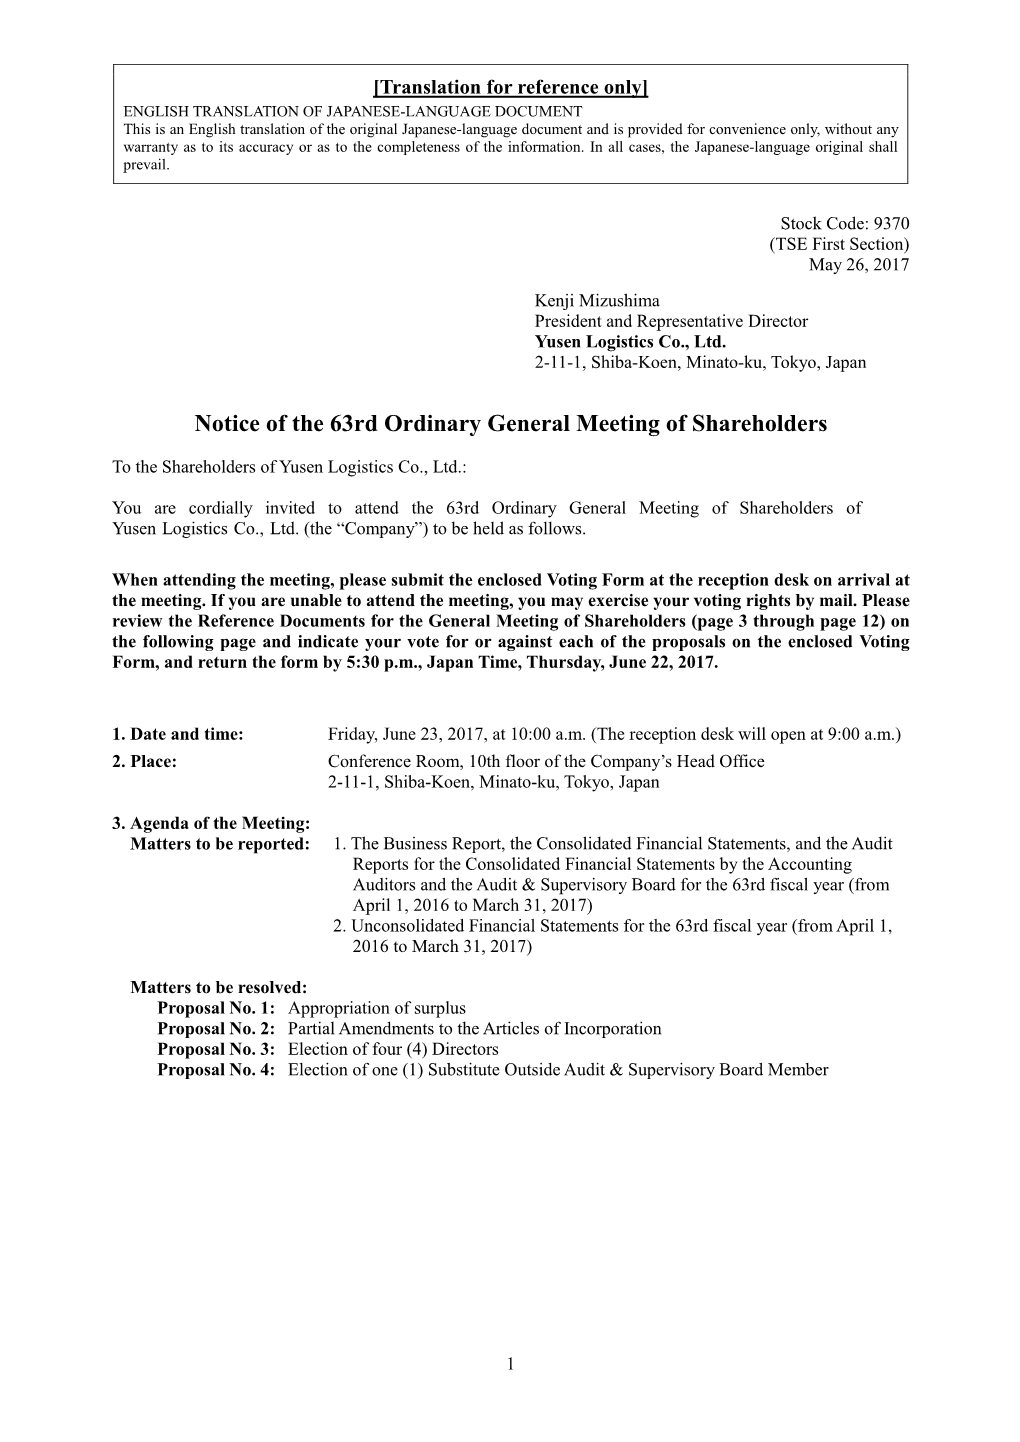 Notice of the 63Nd Ordinary General Meeting of Shareholders